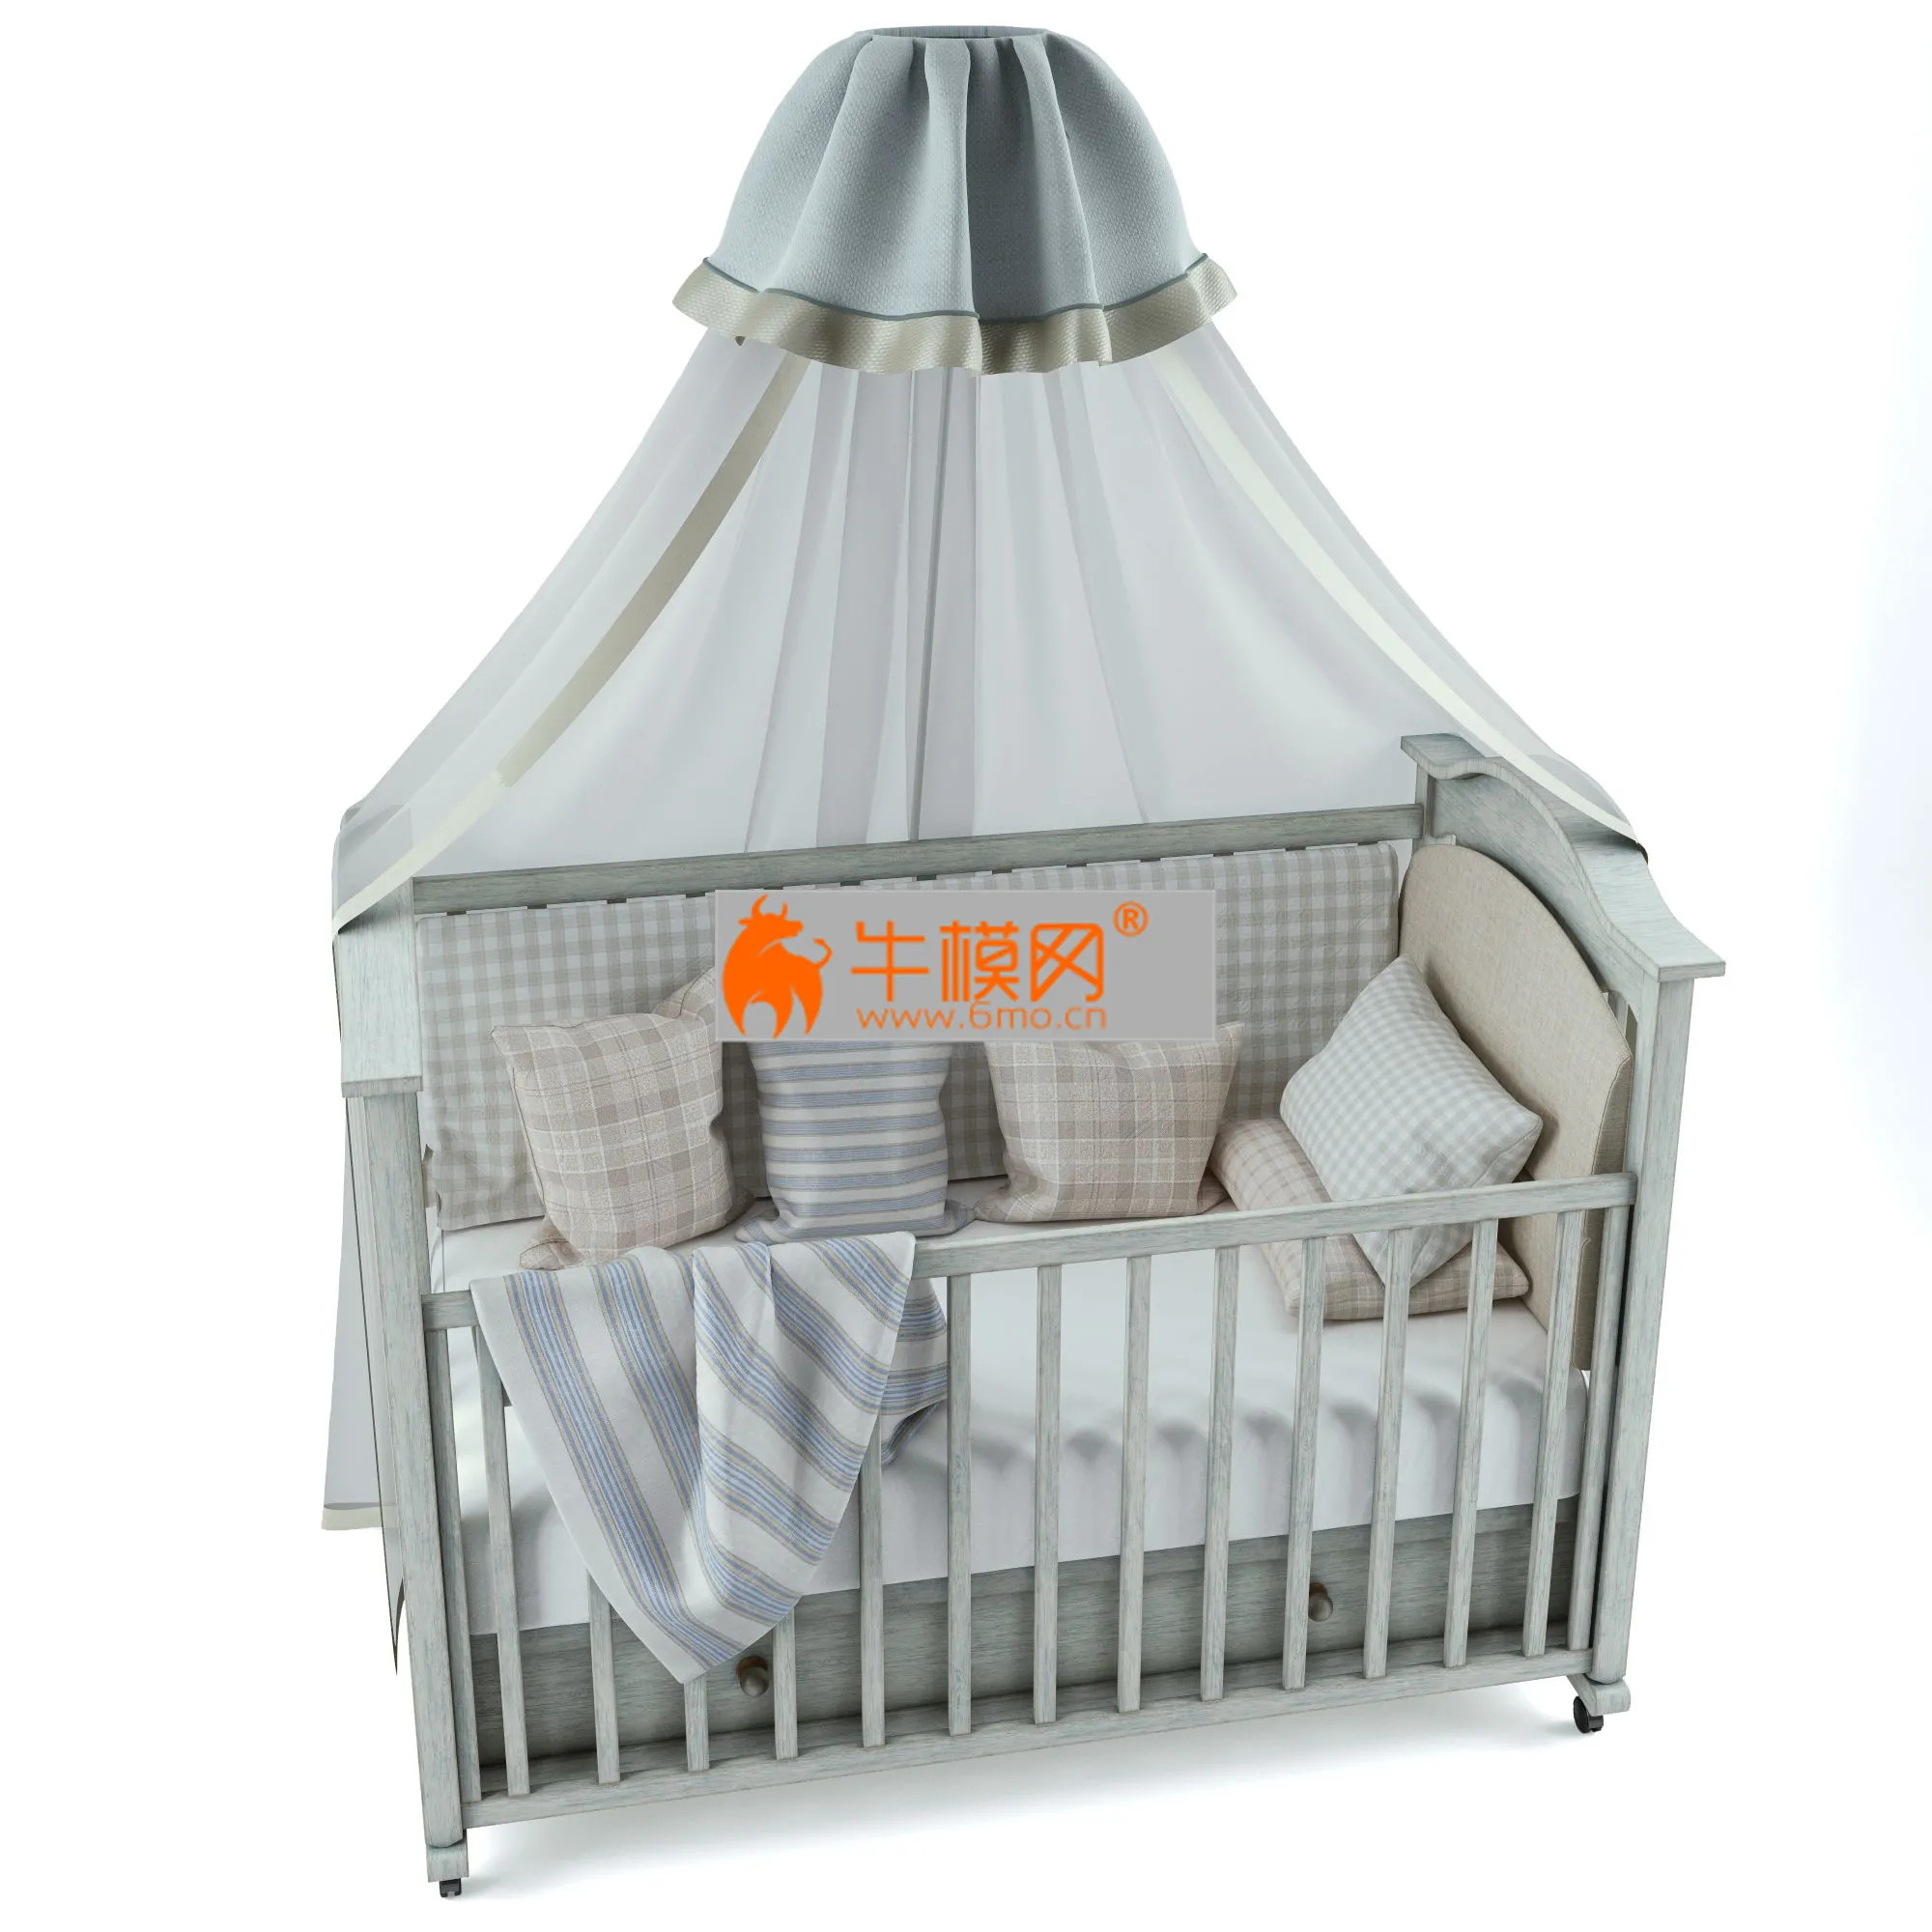 Cot in the classic style – 1537